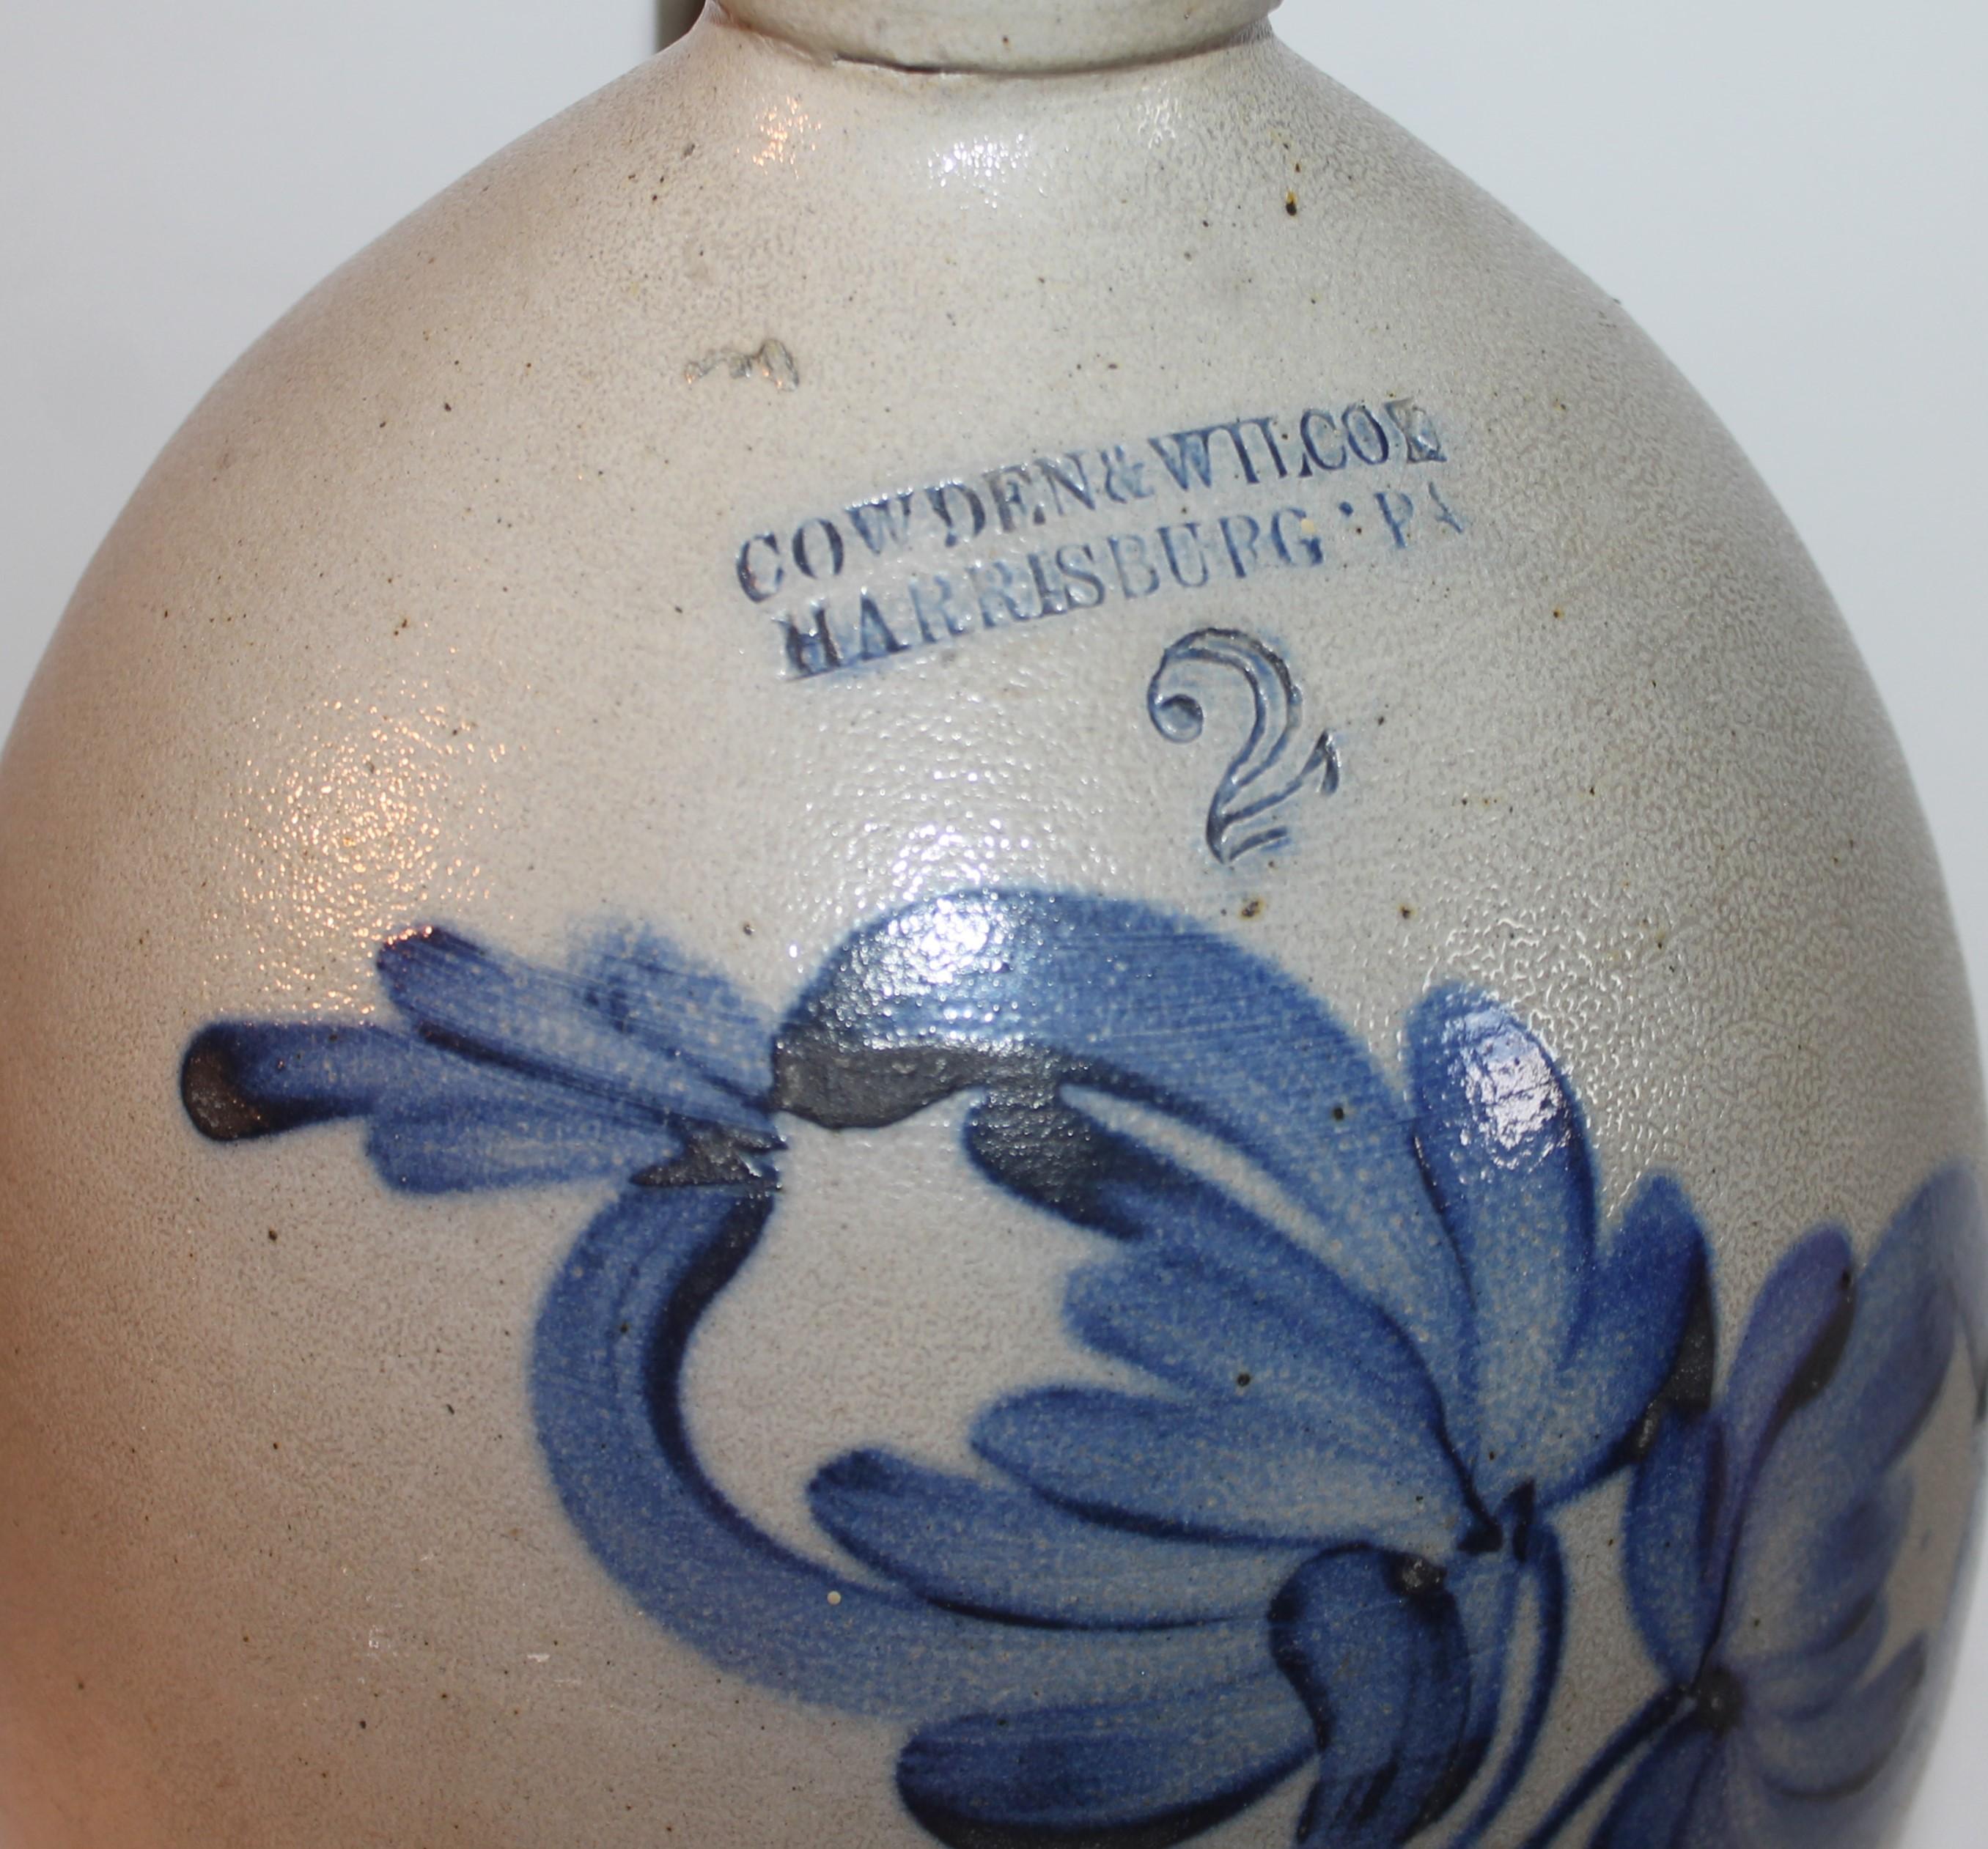 This 19thc original decorated two gallon stoneware jug is in fine condition. It is a Cowden & Wilcox decorated jug from Harrisburg,Pennsylvania. The condition is very good.